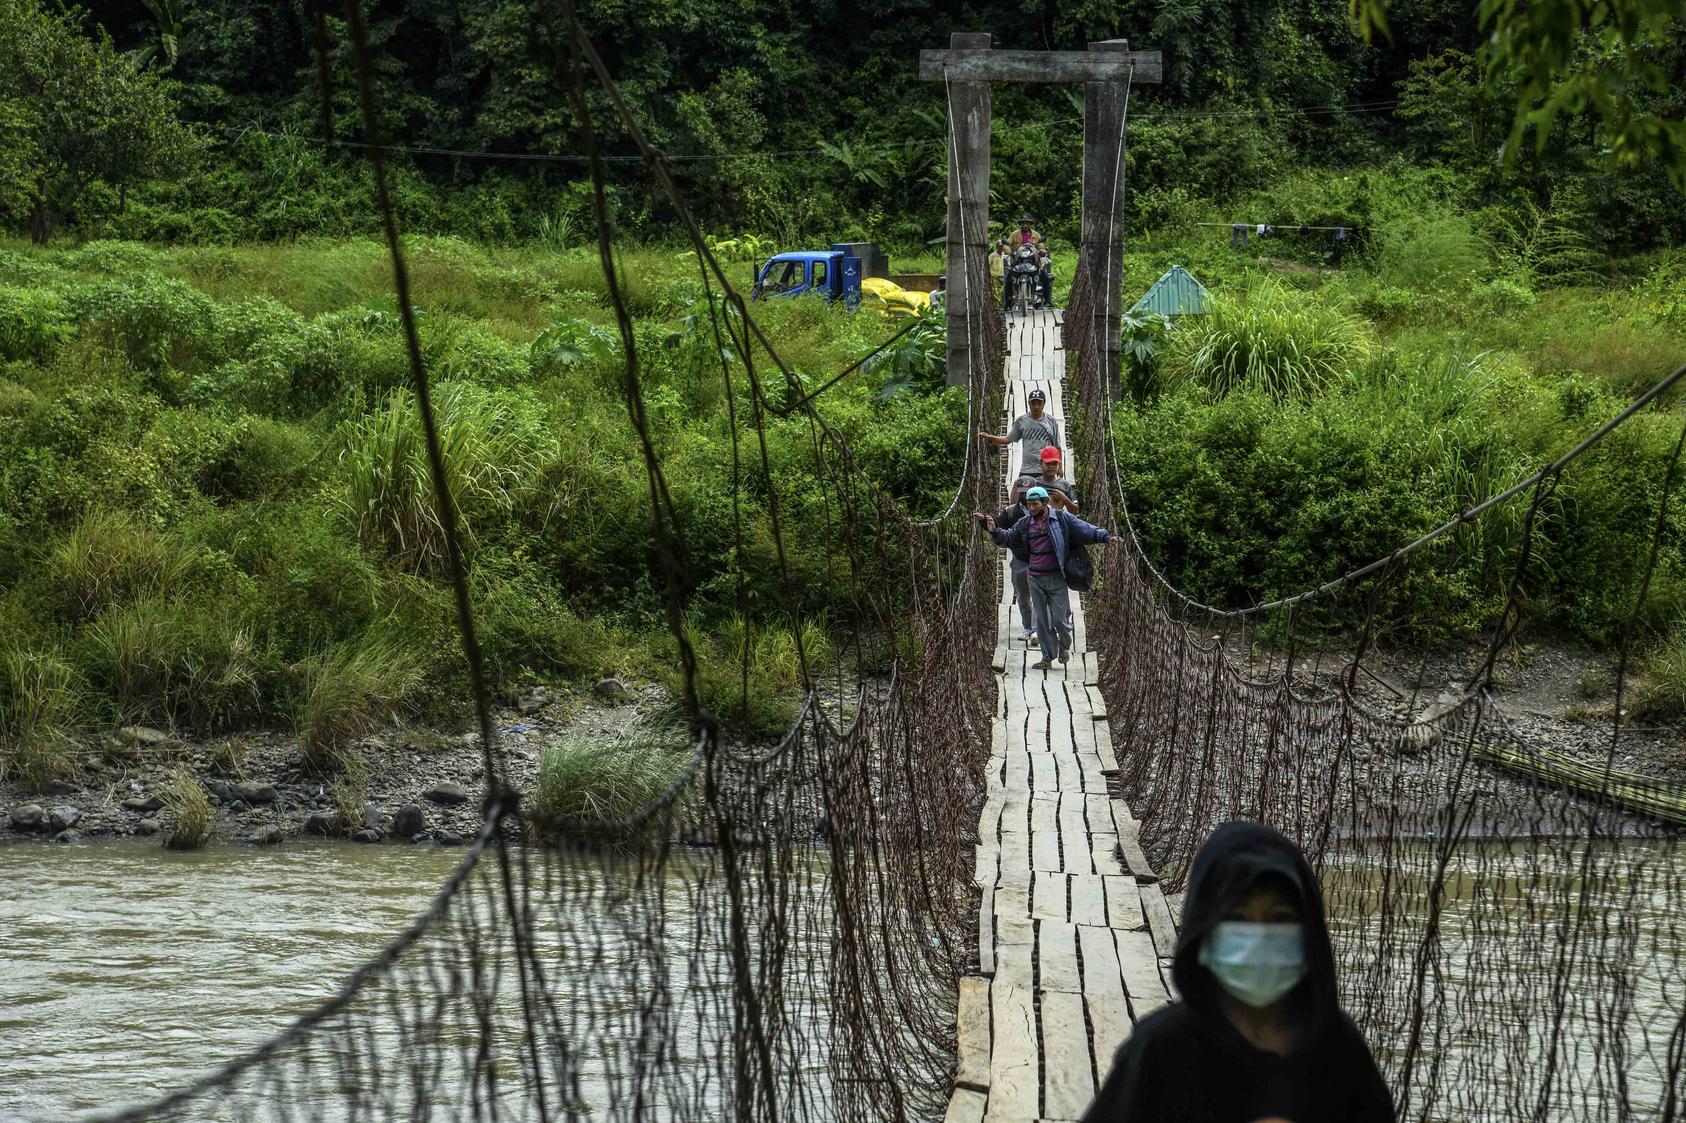 Refugees cross a suspension bridge from Myanmar into India, Oct. 16, 2021. An estimated 22,000 refugees have entered India from Myanmar since February 2021 military coup. (Atul Loke/The New York Times)